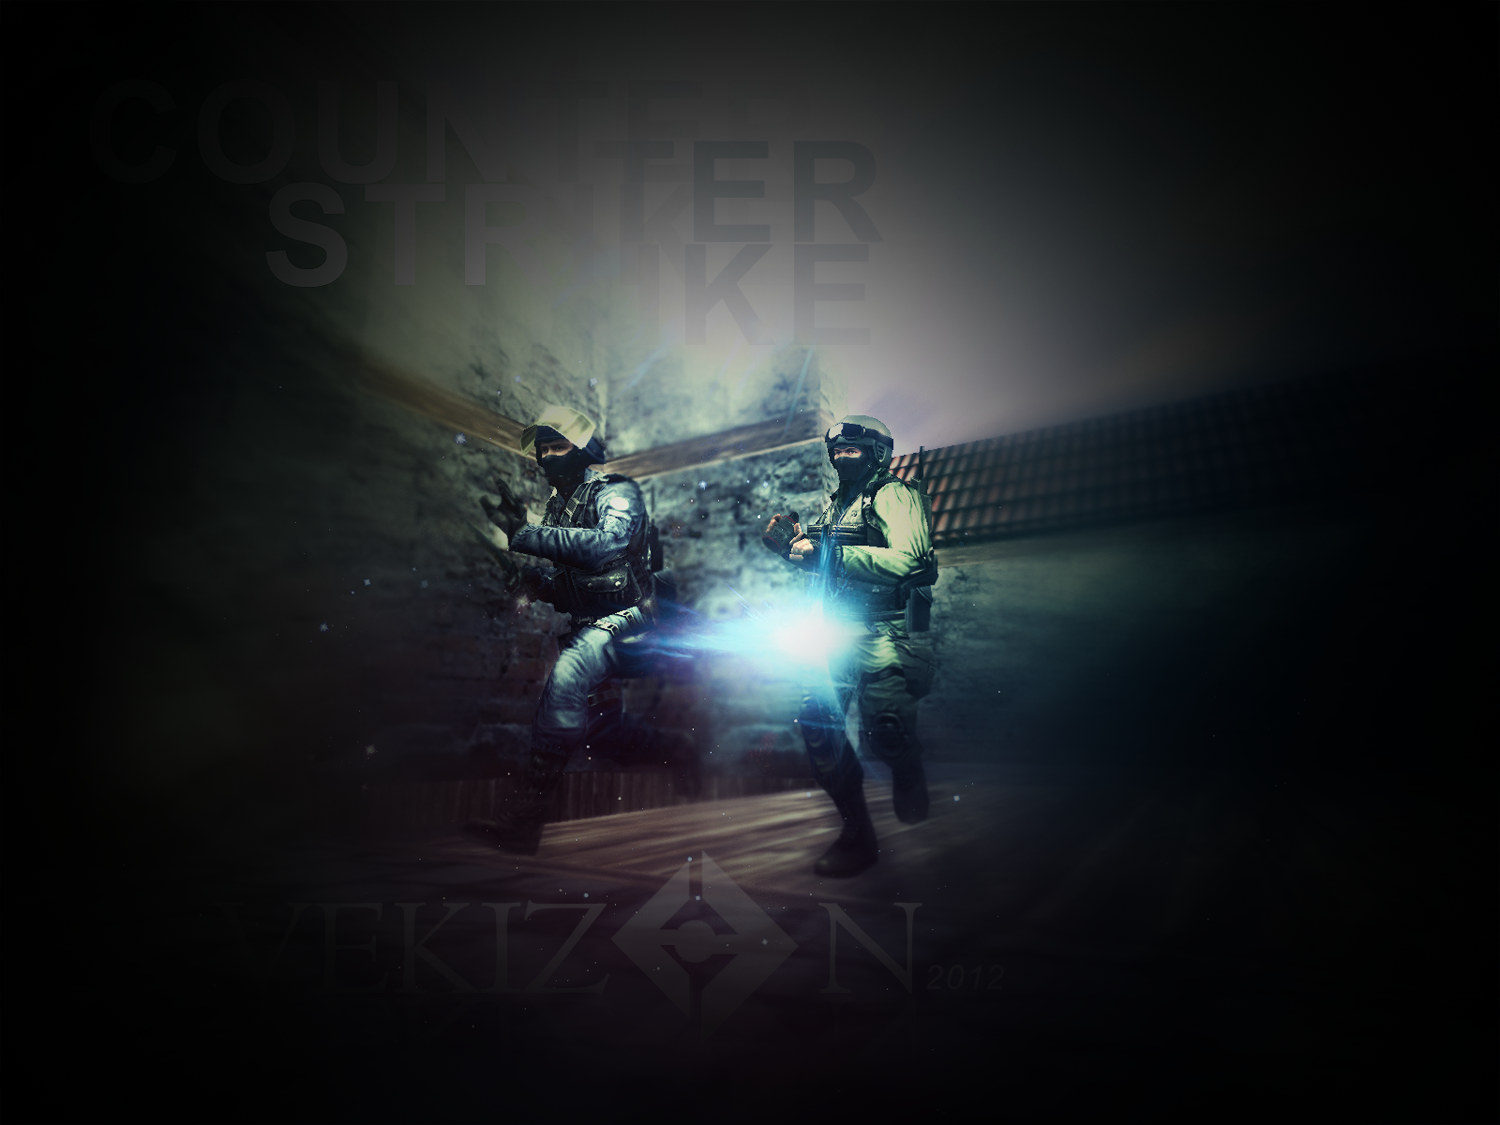 Counter Strike Wallpaper by ZiDes1gn on